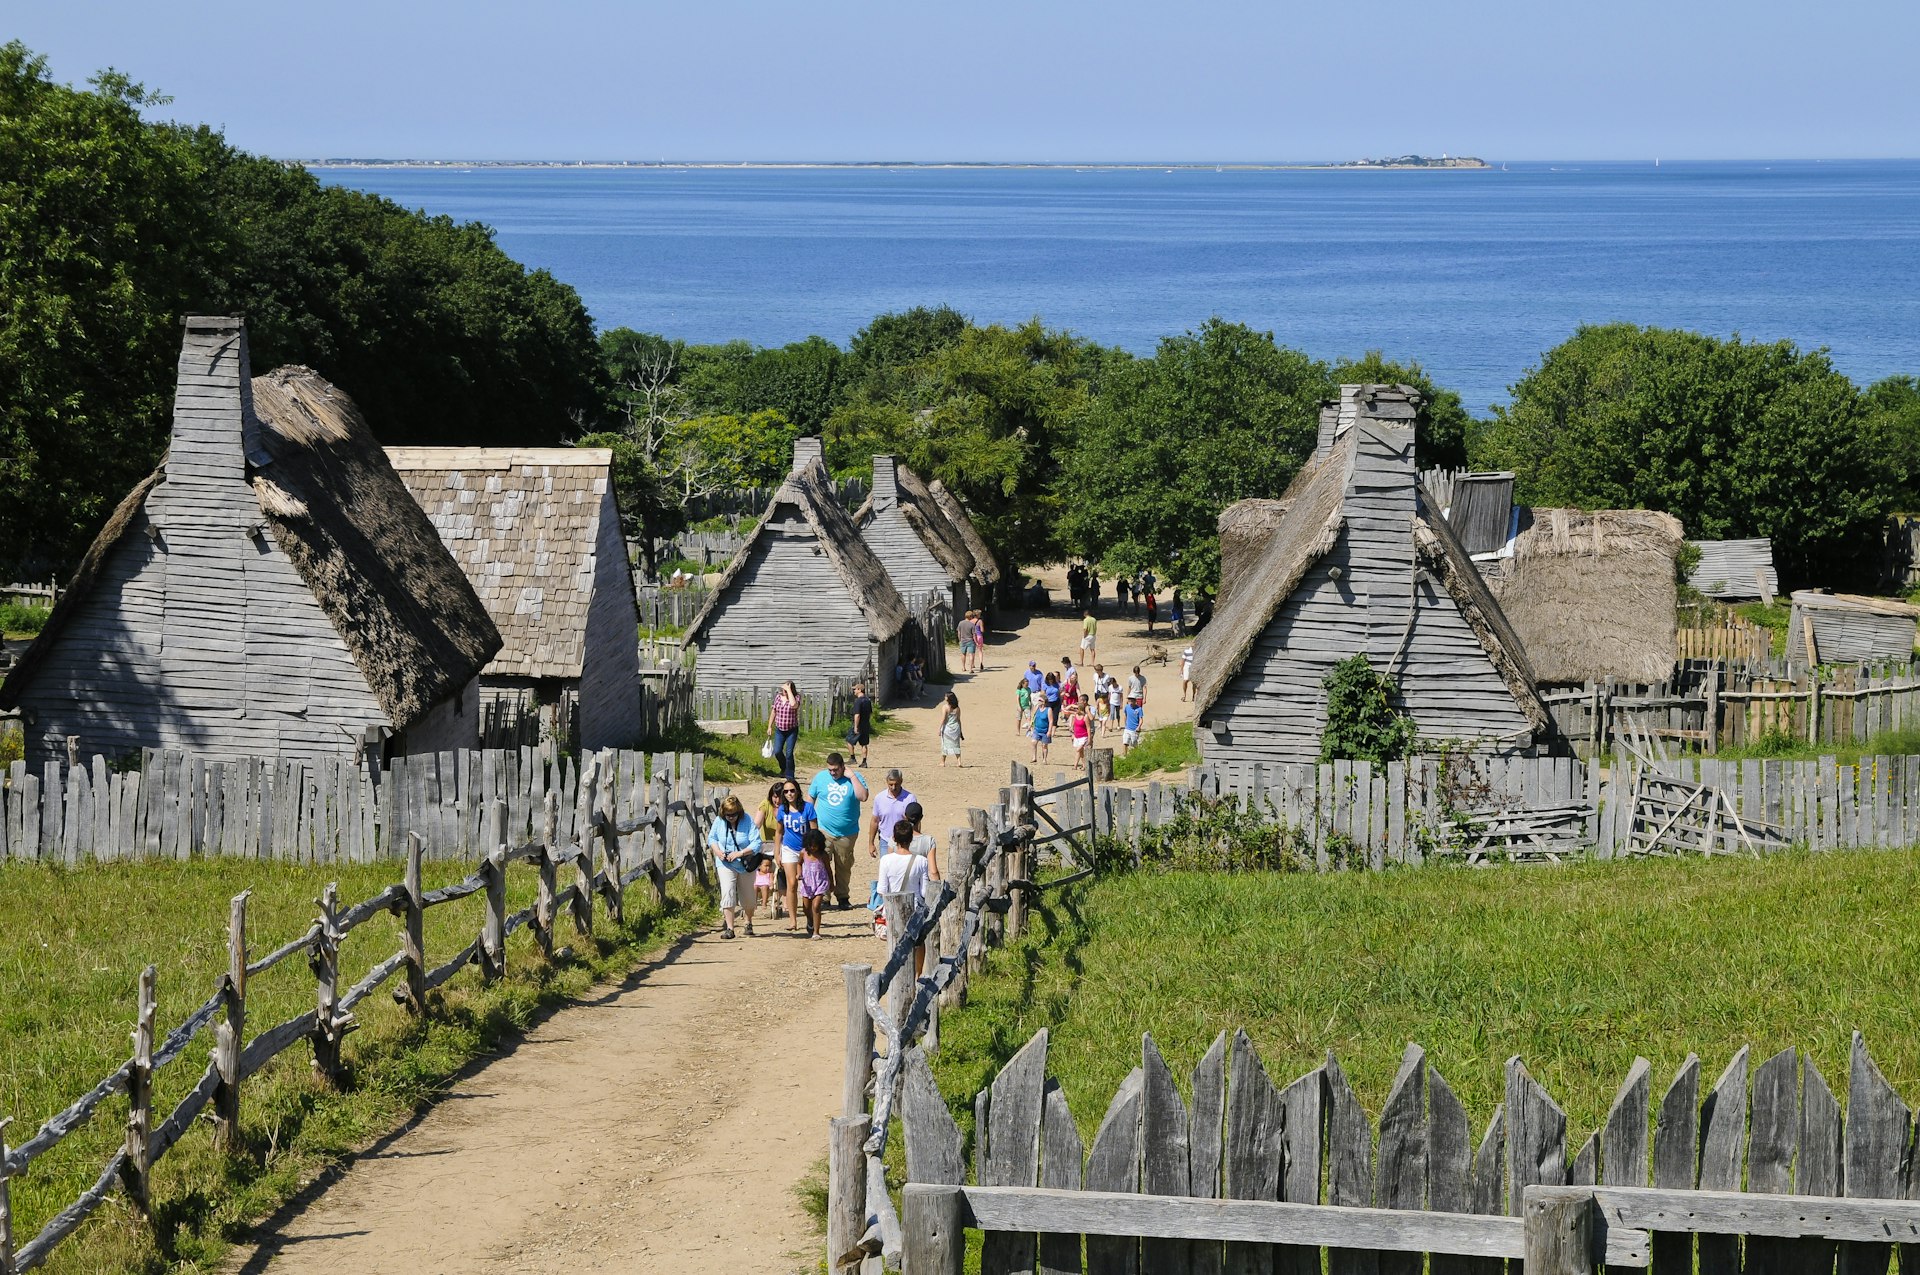 A village of small wooden houses by the sea with tourists wandering among them 